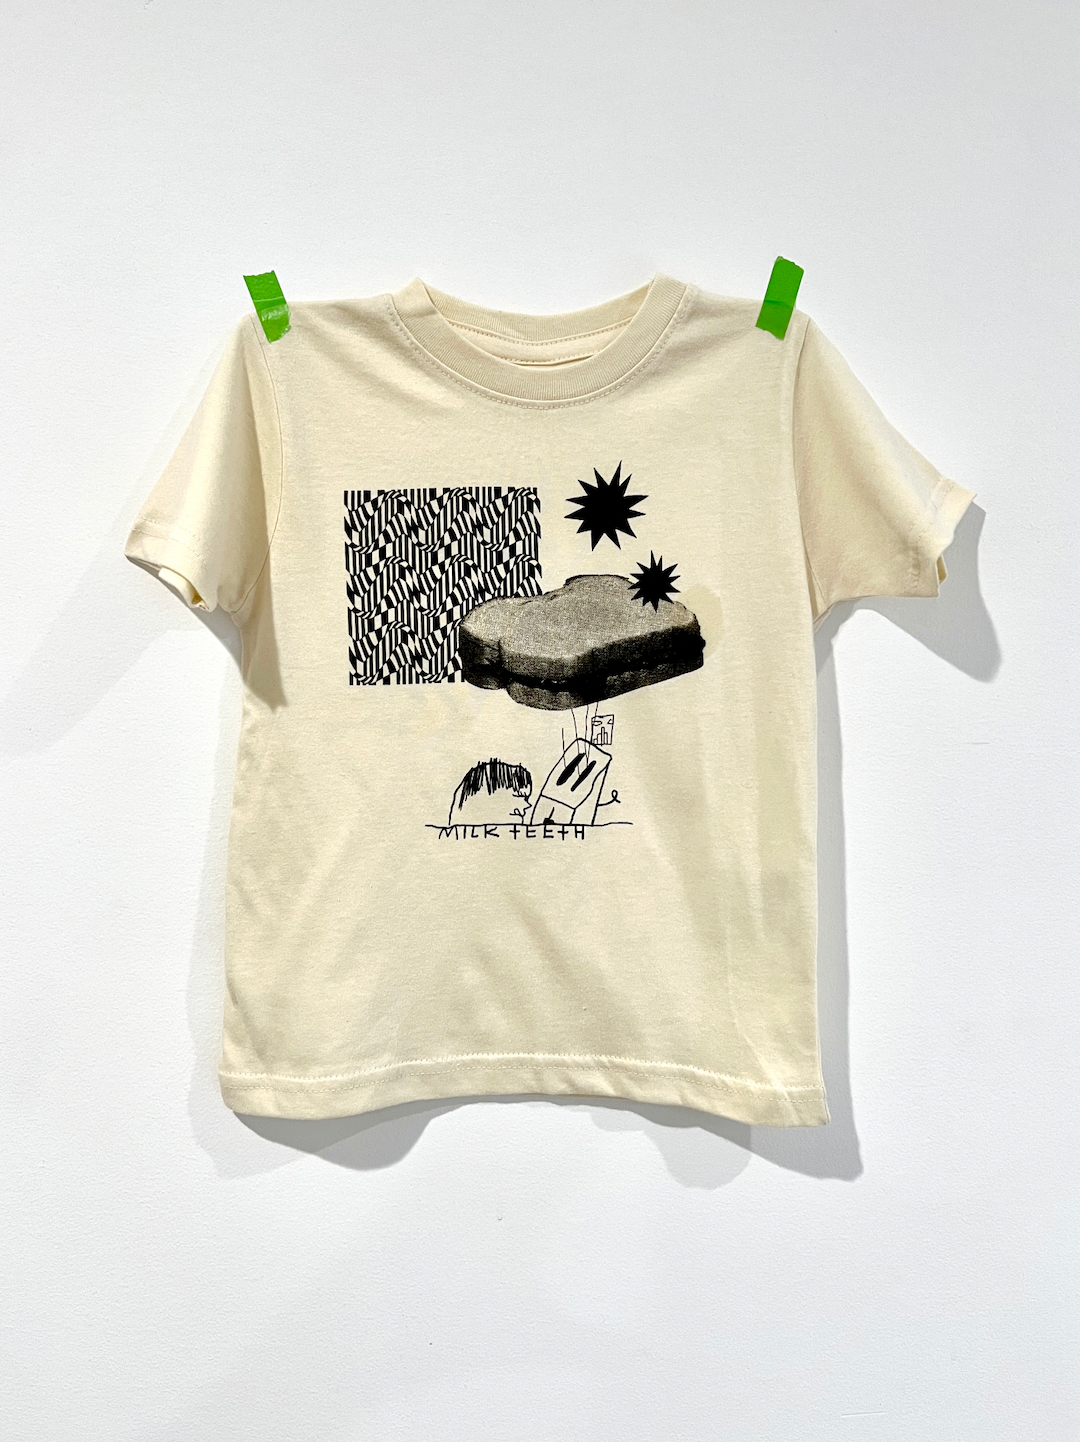 A kids' tee shirt in cream, printed in black with zigzag patterns, stars, a PBJ sandwich, a toaster and the words Milk teeth